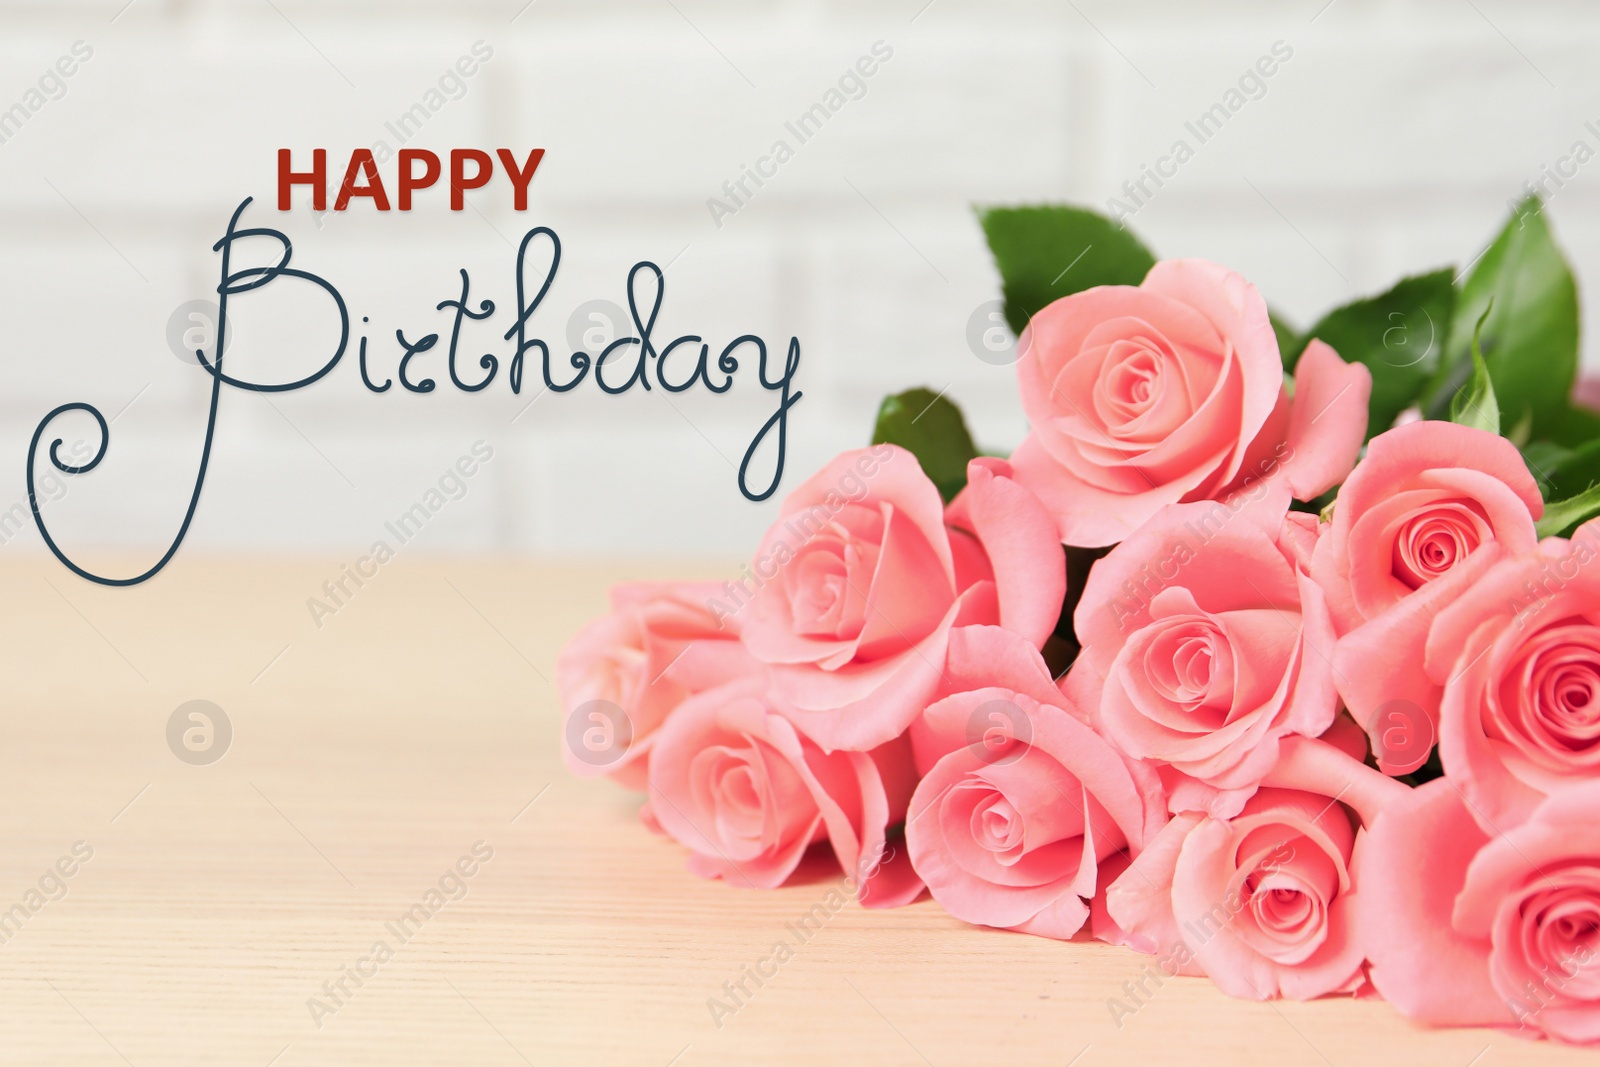 Image of Happy Birthday! Bouquet of beautiful roses on wooden table